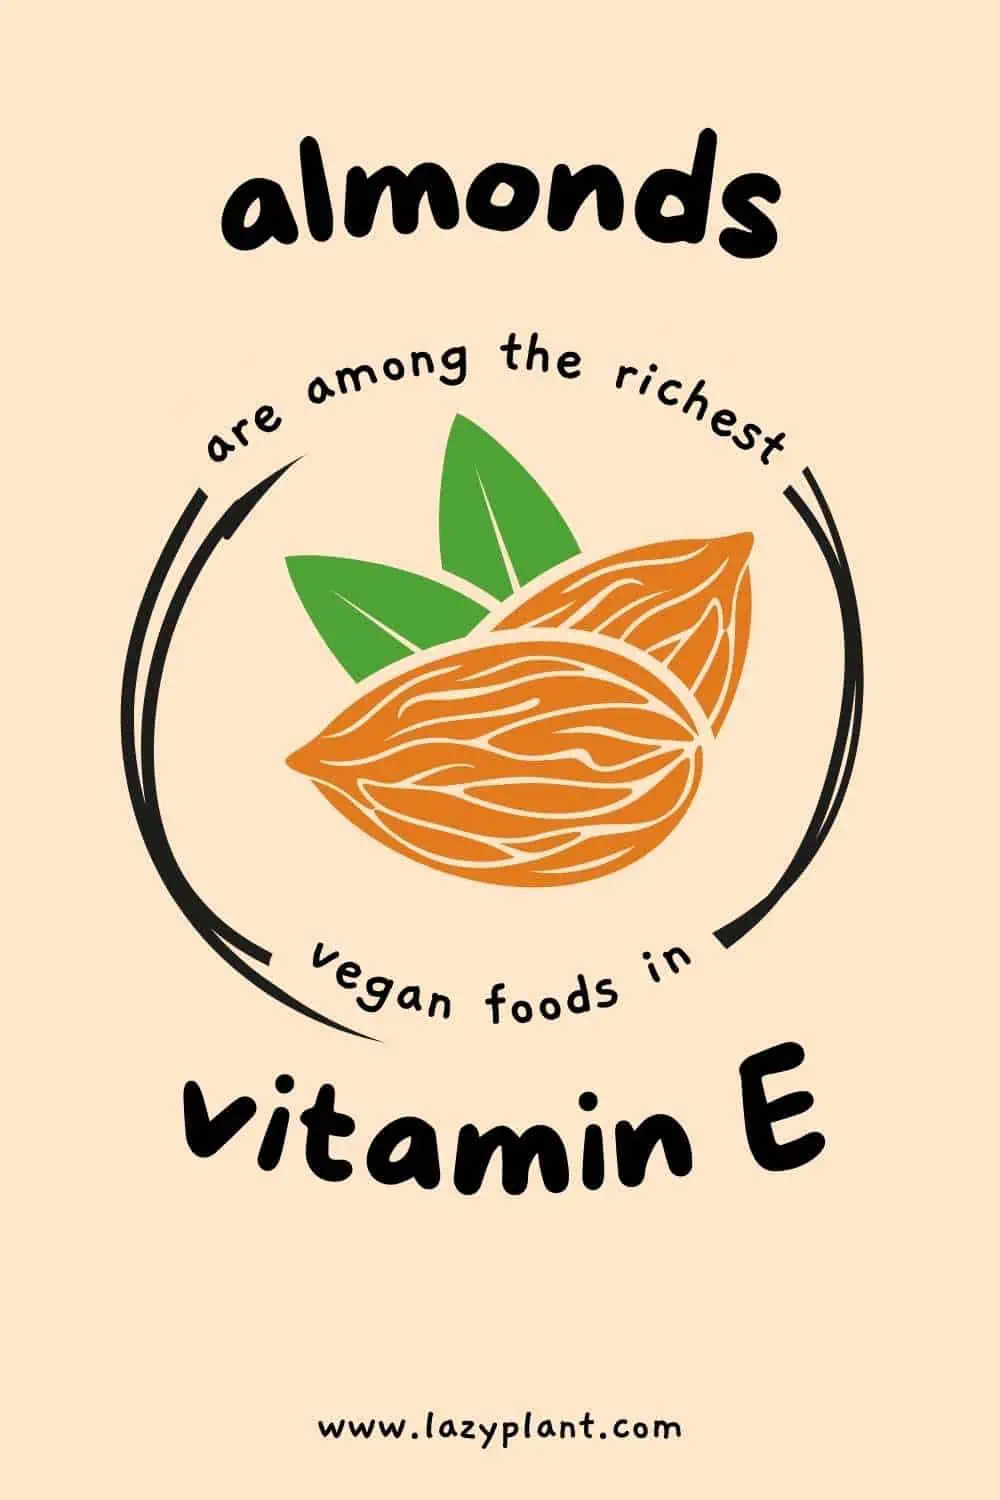 Is almond the richest common plant-based food in vitamin E?